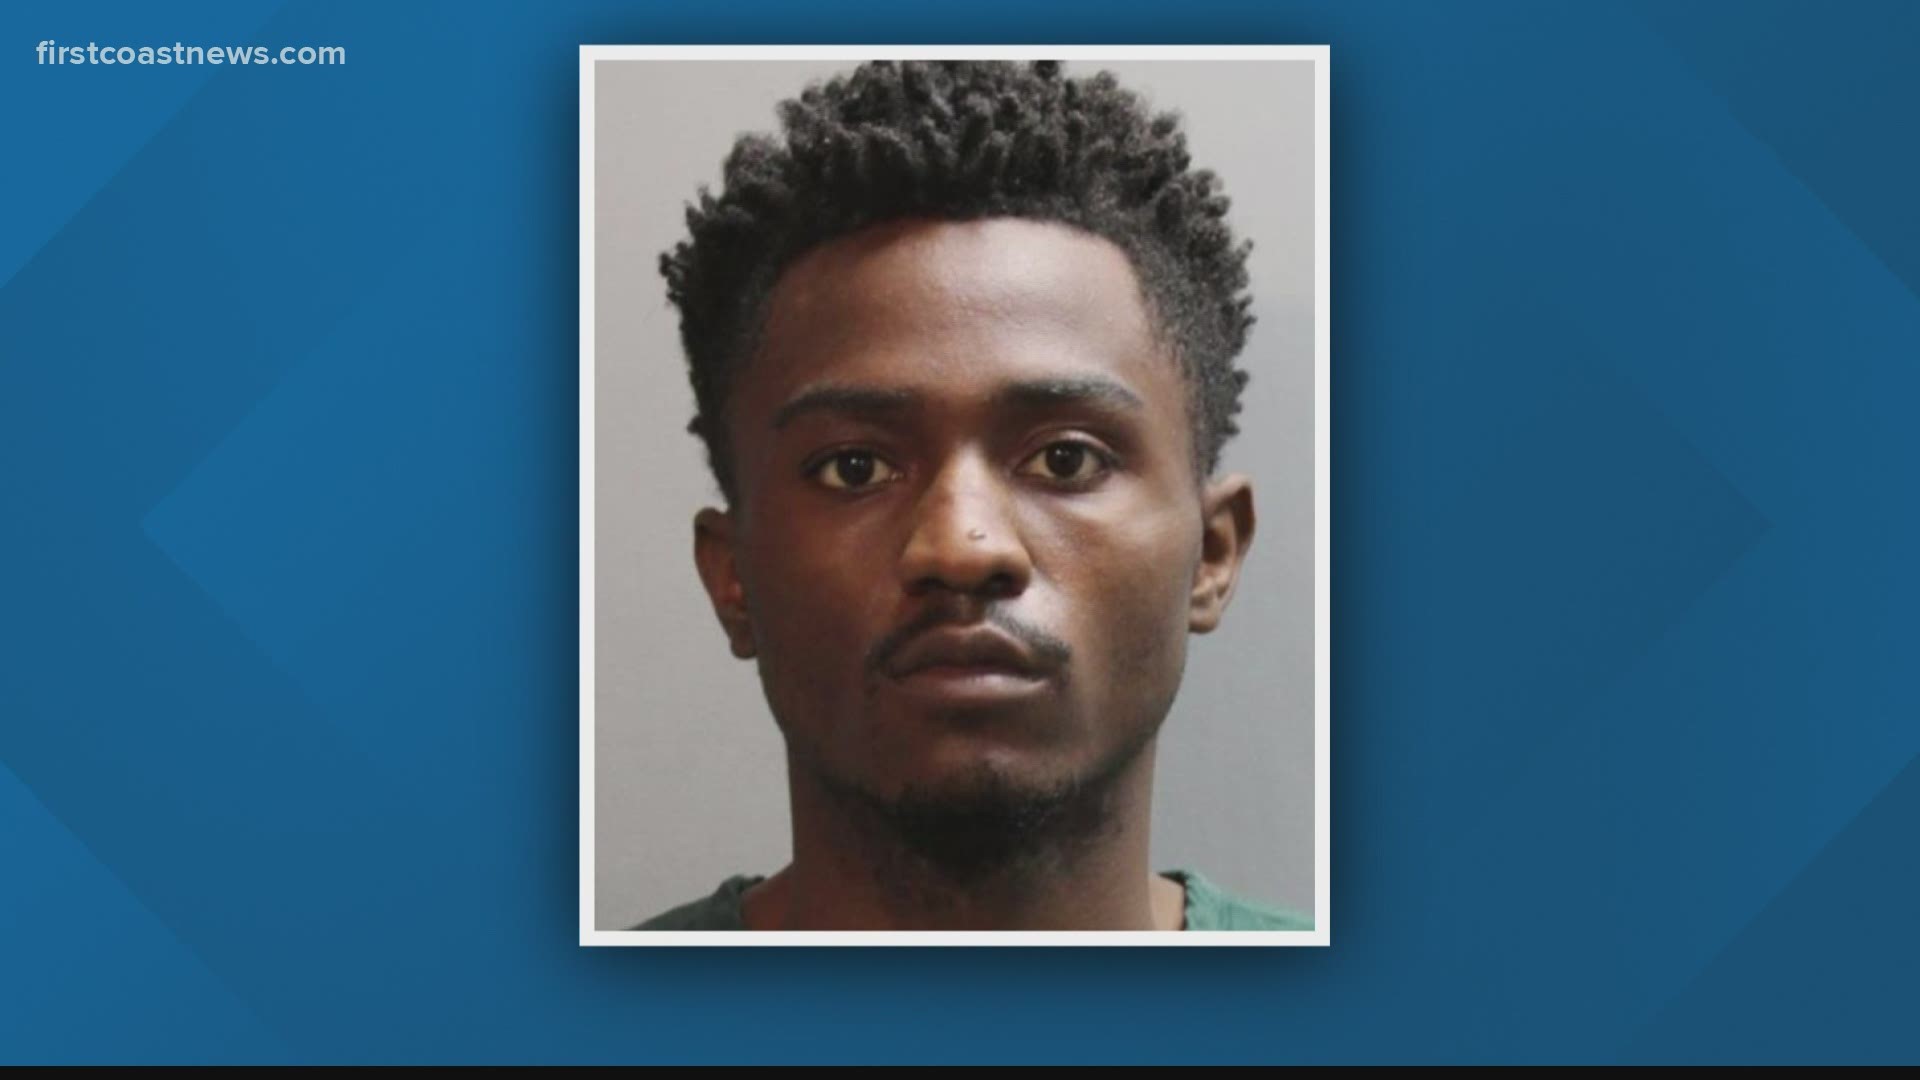 The Jacksonville Sheriff's Office arrested 24-year-old Peter Knox last week after a man was shot and killed at a gas station on 103rd Street April 12.